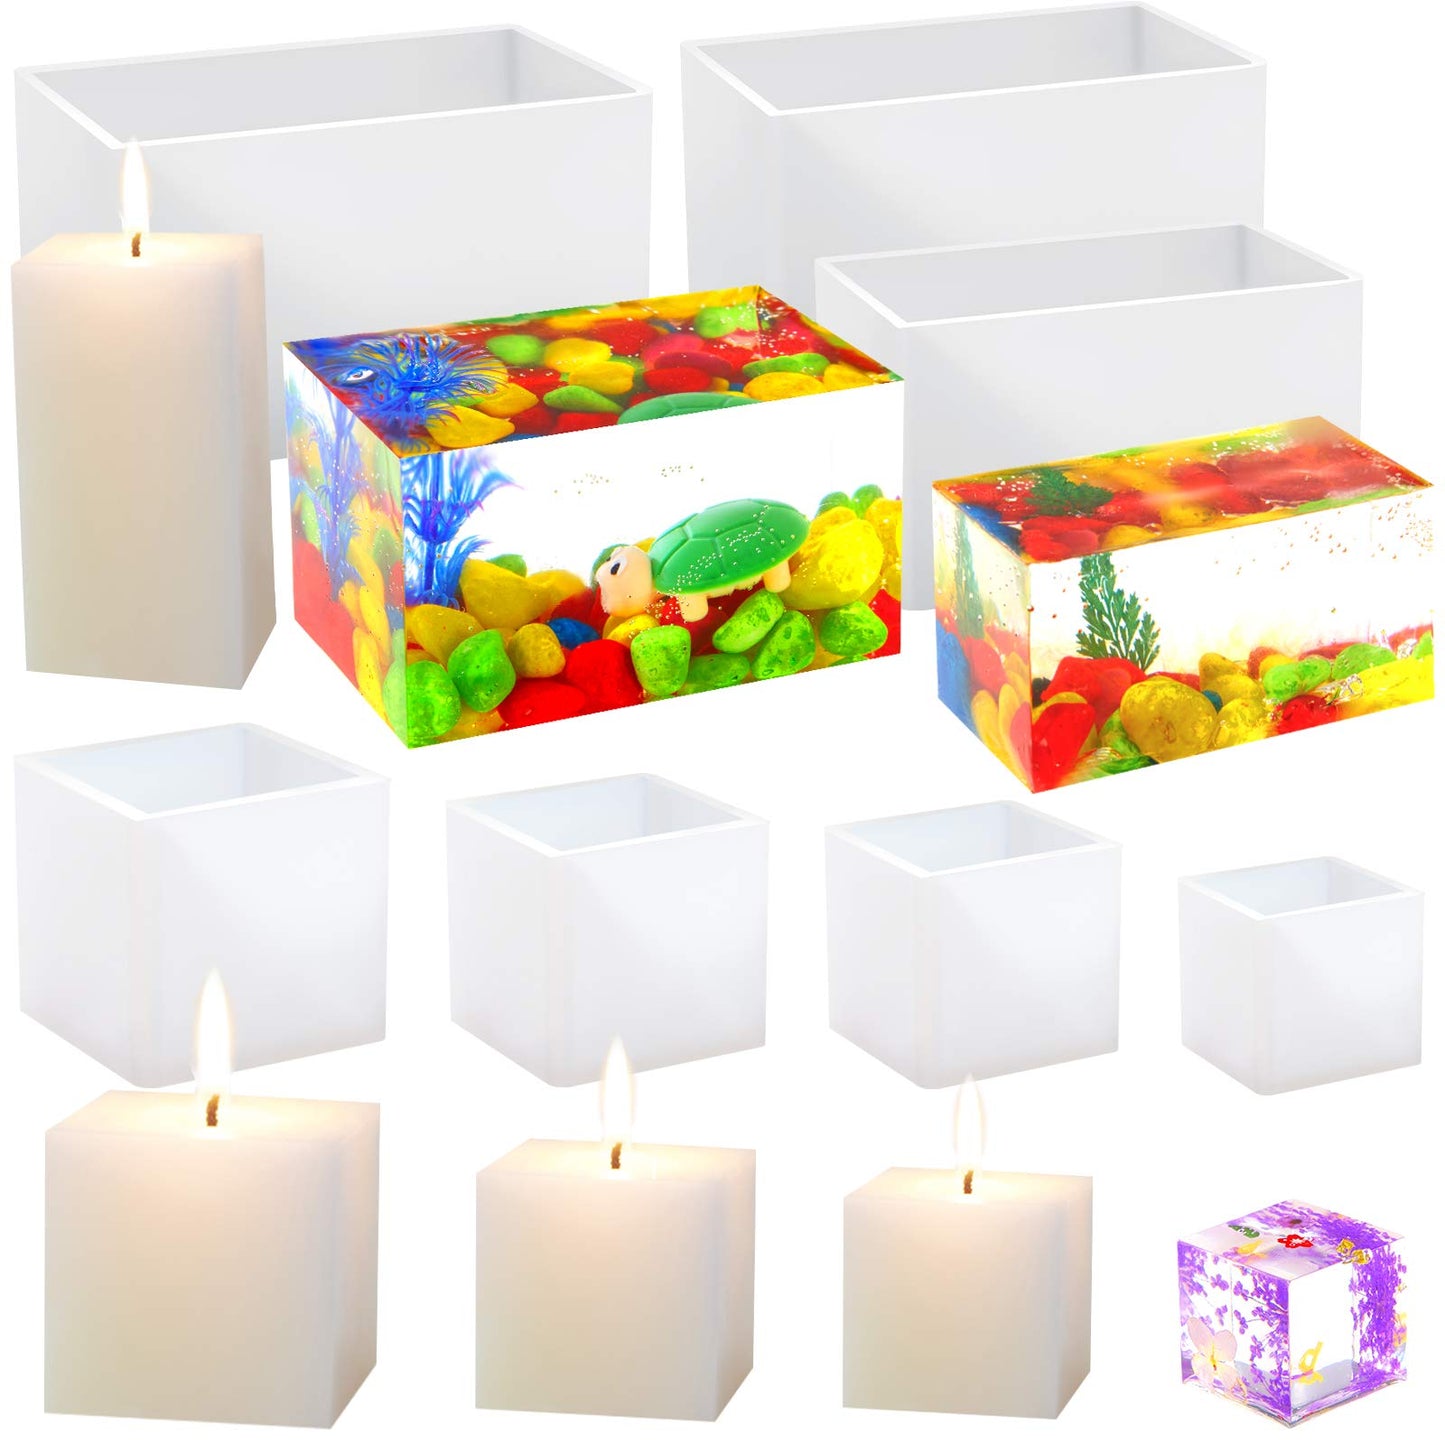 7 Pieces Square Resin Molds Rectangle Resin Molds Candle Mold Cube Casting Molds for Insect Specimen Coaster Flower Pot Candle Soap Jewelry Holder